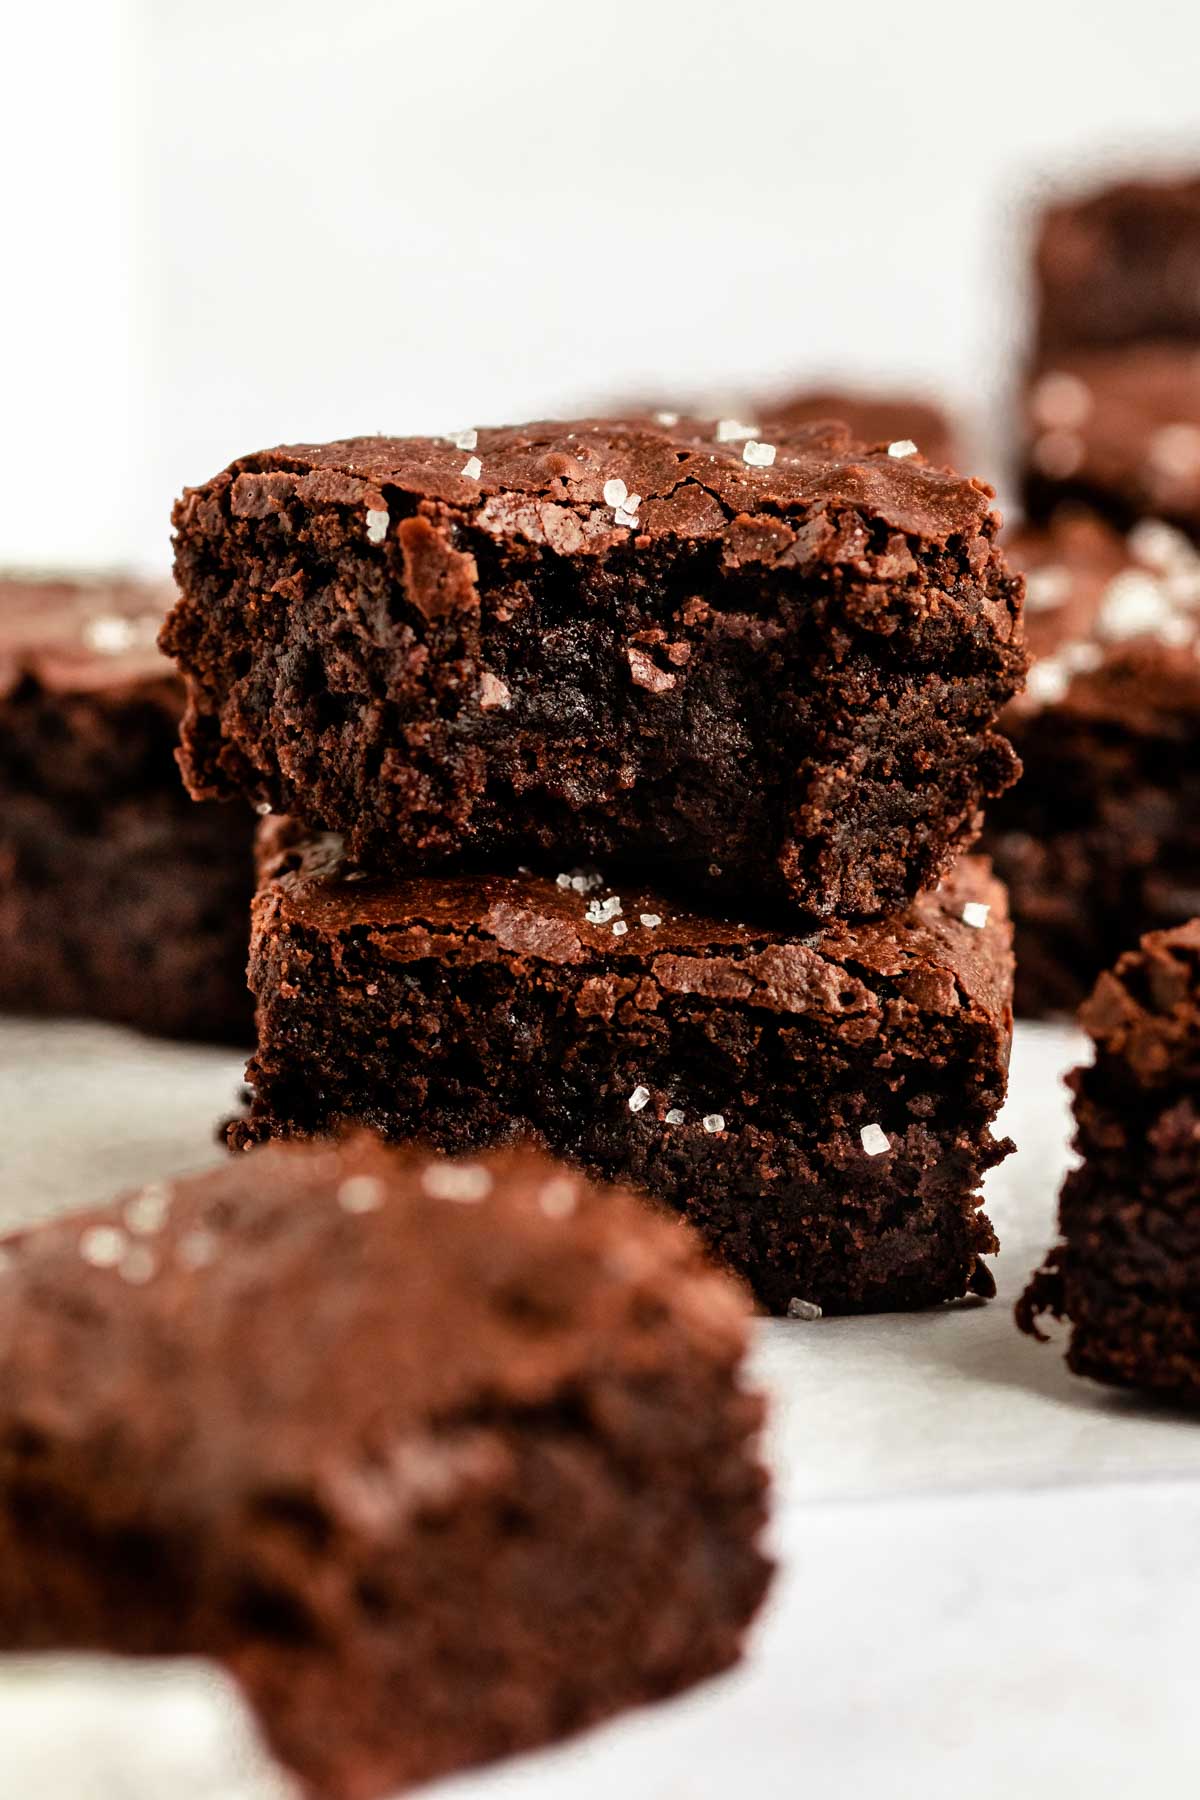 Stack of small batch brownies with the top one missing a bite.